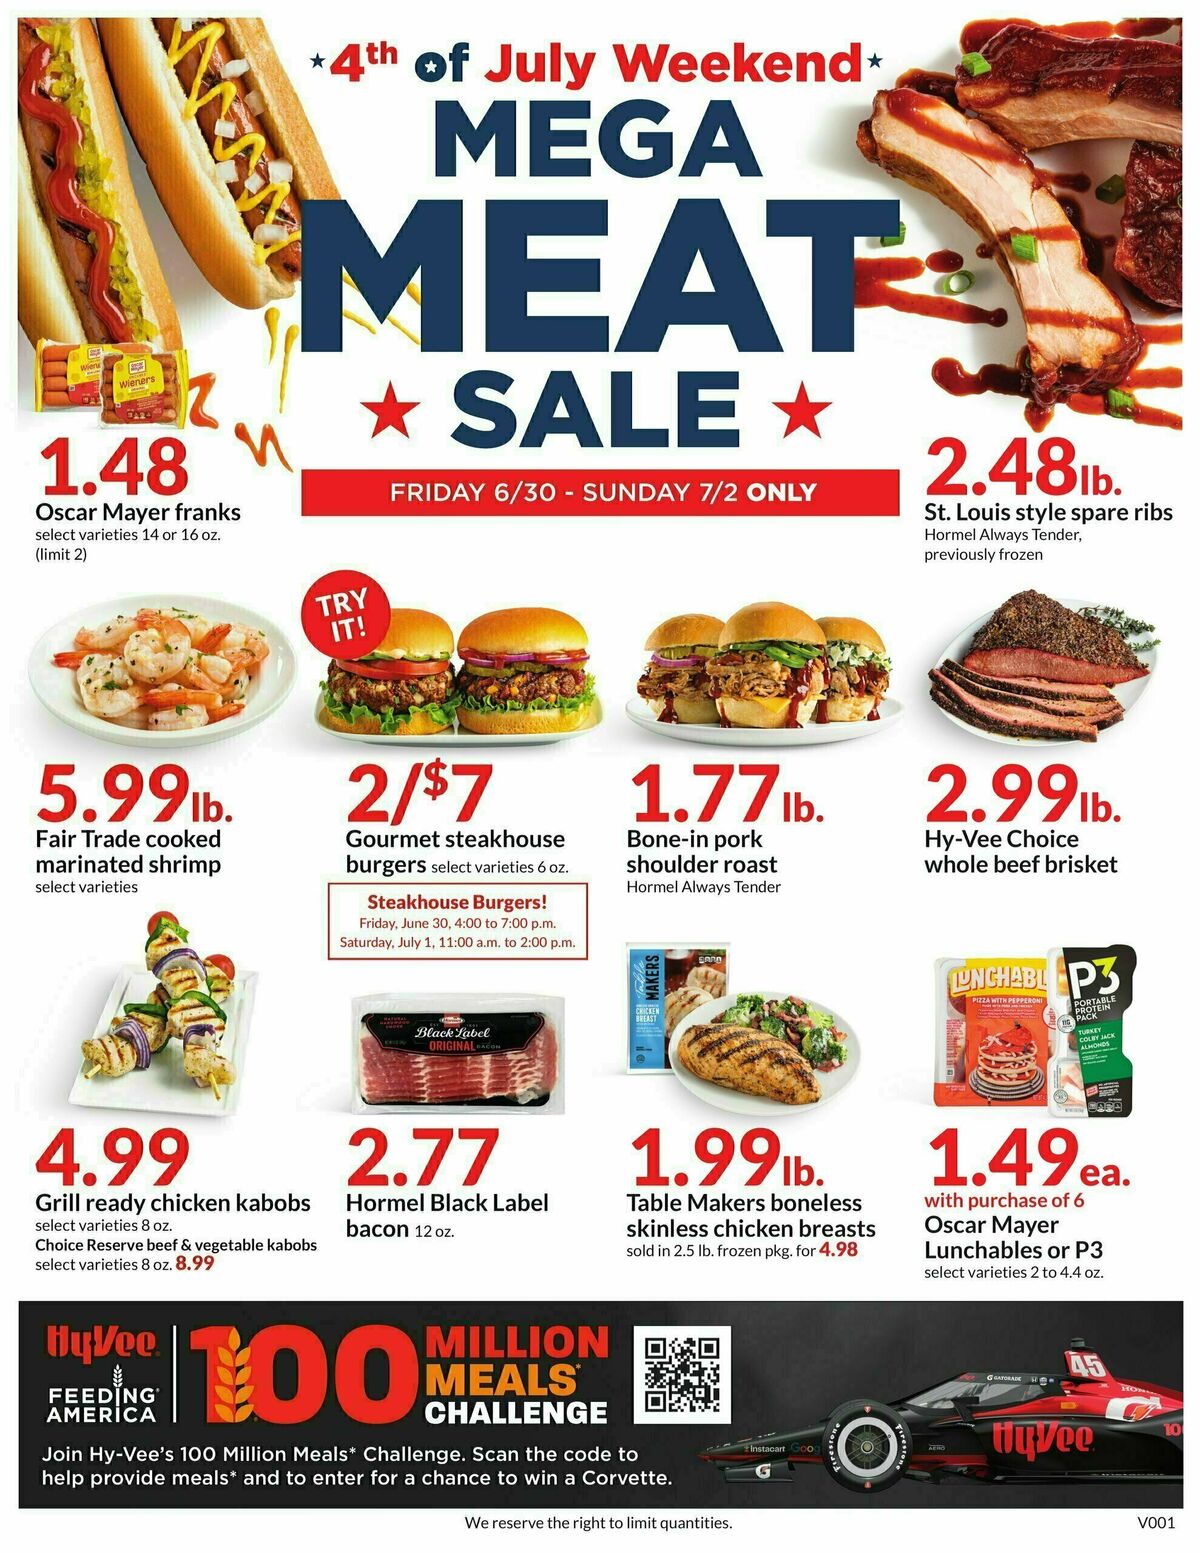 HyVee Mega Meat Sale Deals & Ads from June 30